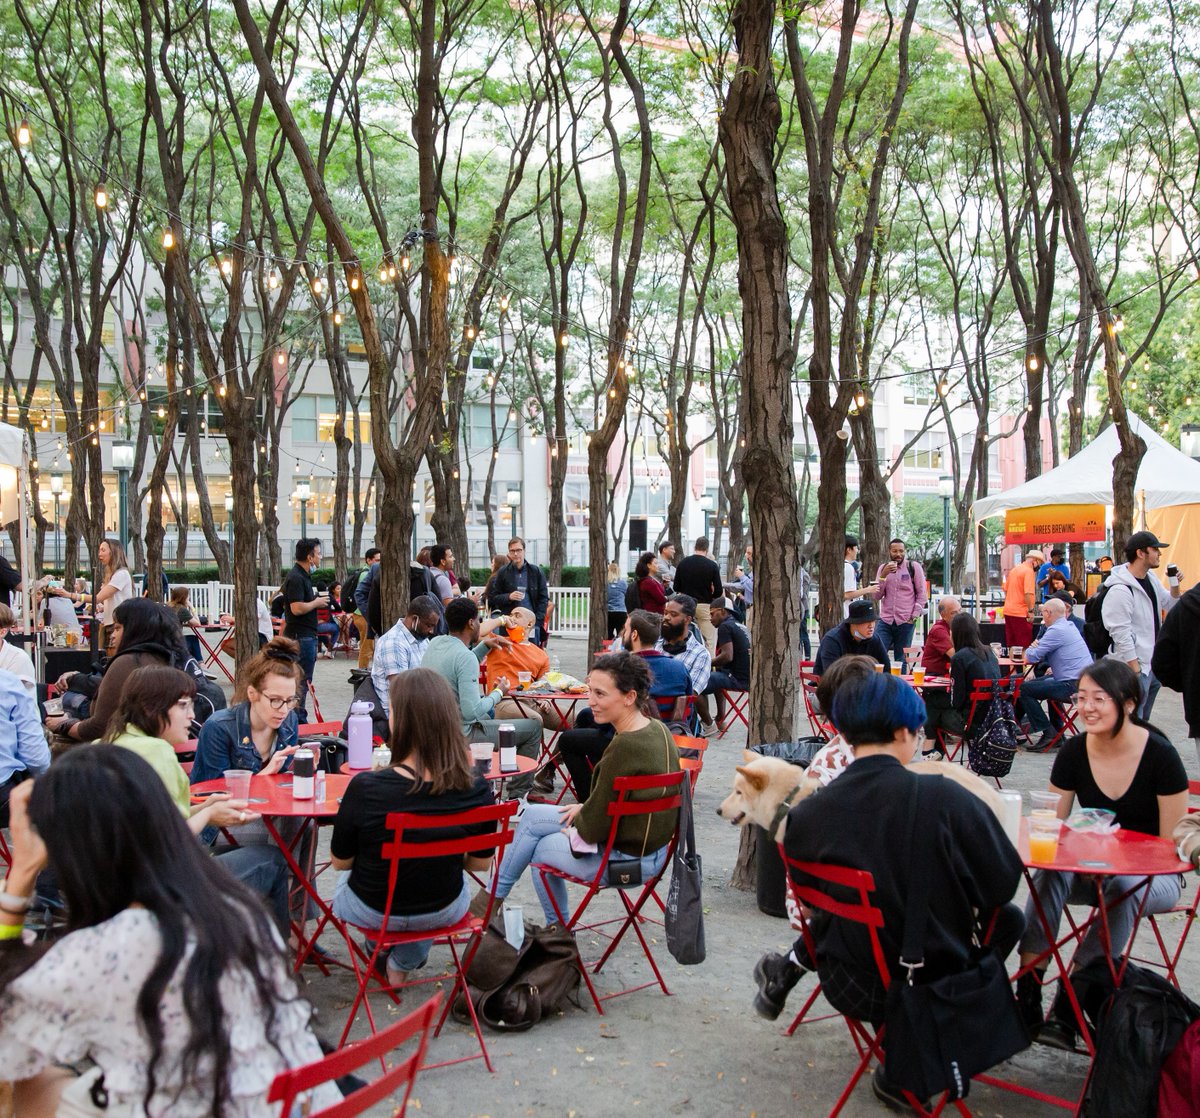 Grab drinks in #DowntownBrooklyn tomorrow! 🍻 For the next three Thursday evenings, gather friends + family to enjoy local beer, lawn games + more during 'Brews at Brooklyn Commons,' a temporary outdoor beer garden. ⏰ 9/22, 9/29 + 10/6 at 4:00 PM 🌐 bit.ly/BrewsBKCommons…